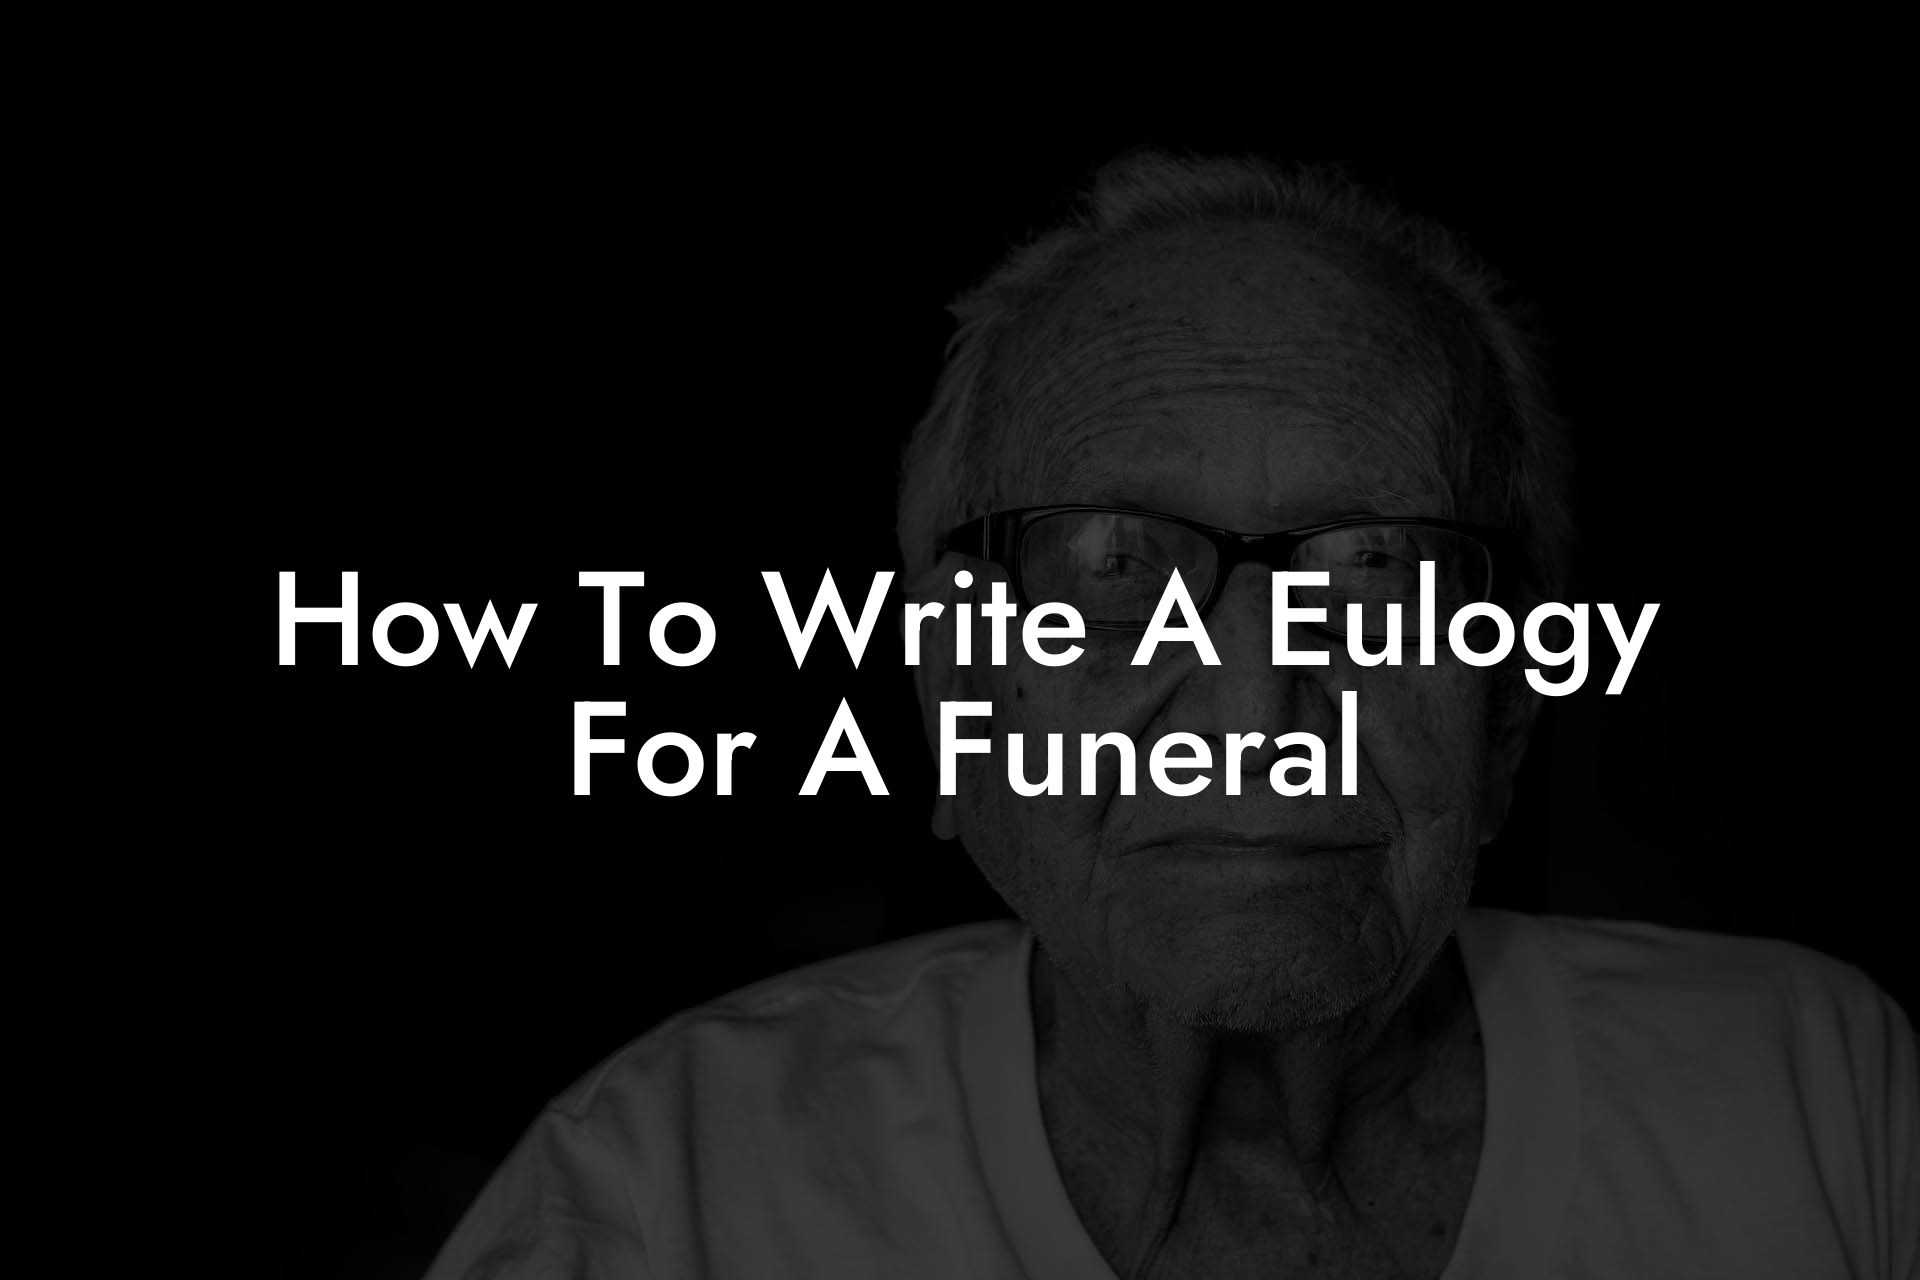 How To Write A Eulogy For A Funeral